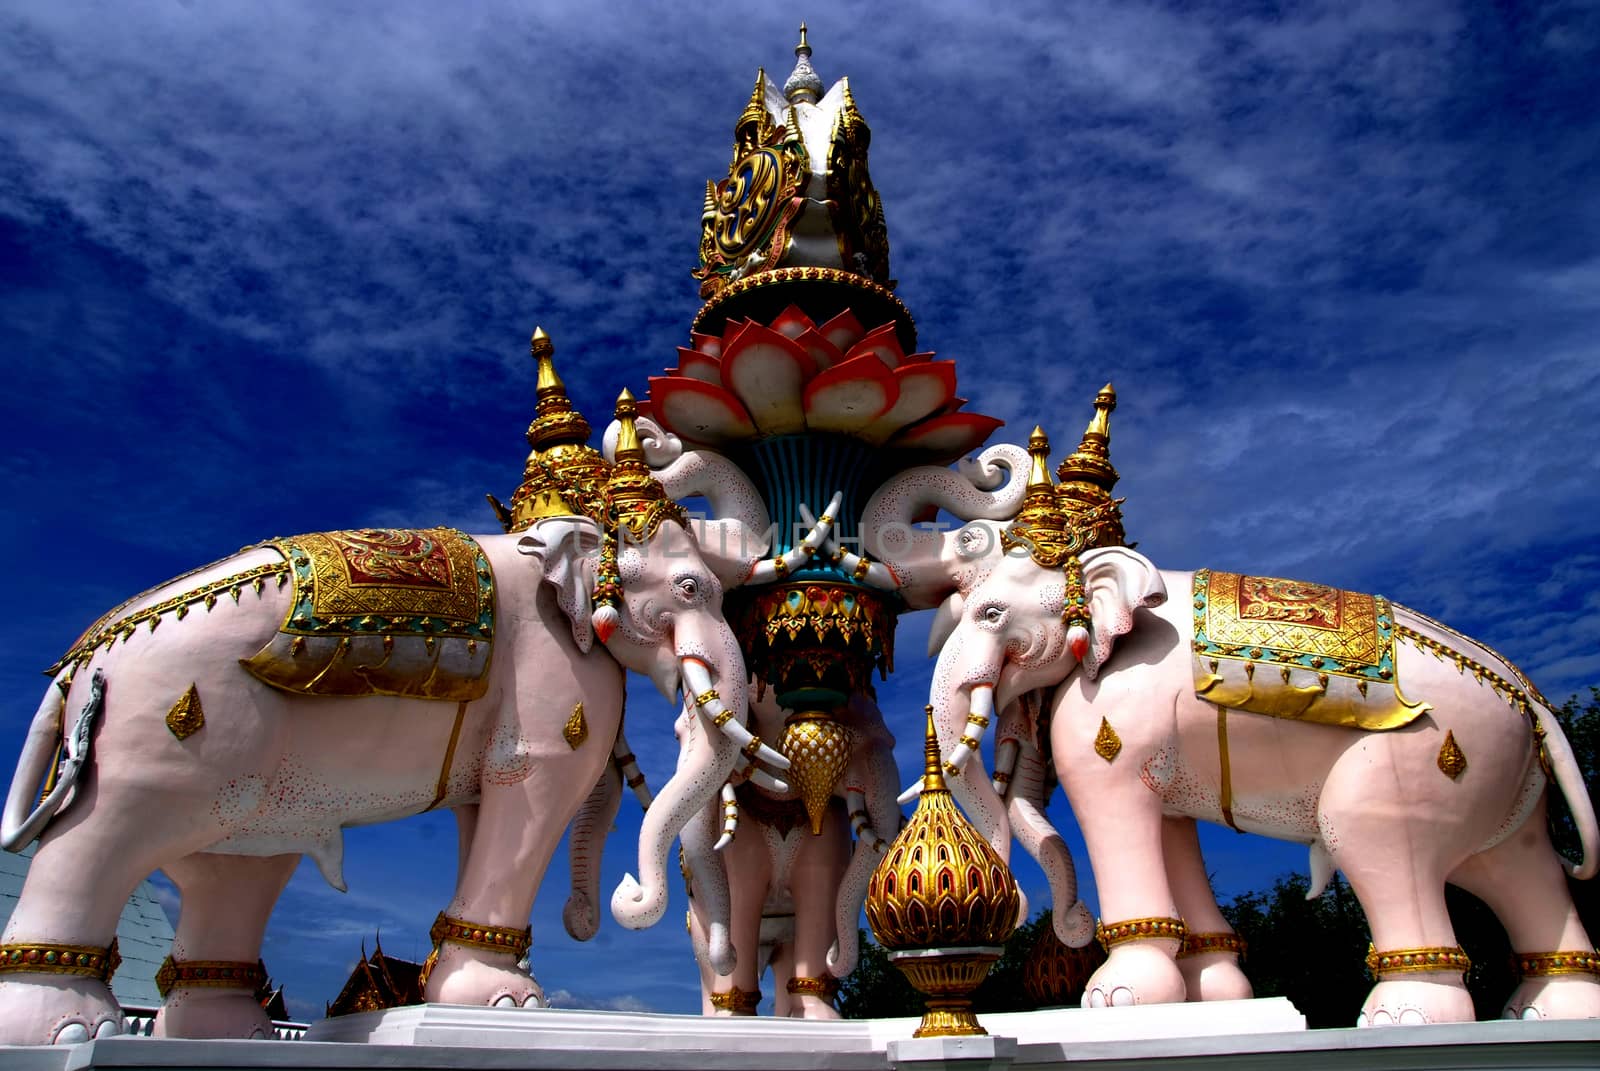 Pink Elephant statue near The Grand Palace
in Bangkok, Thailand. The palace has been the official residence of the Kings of Siam since 1782